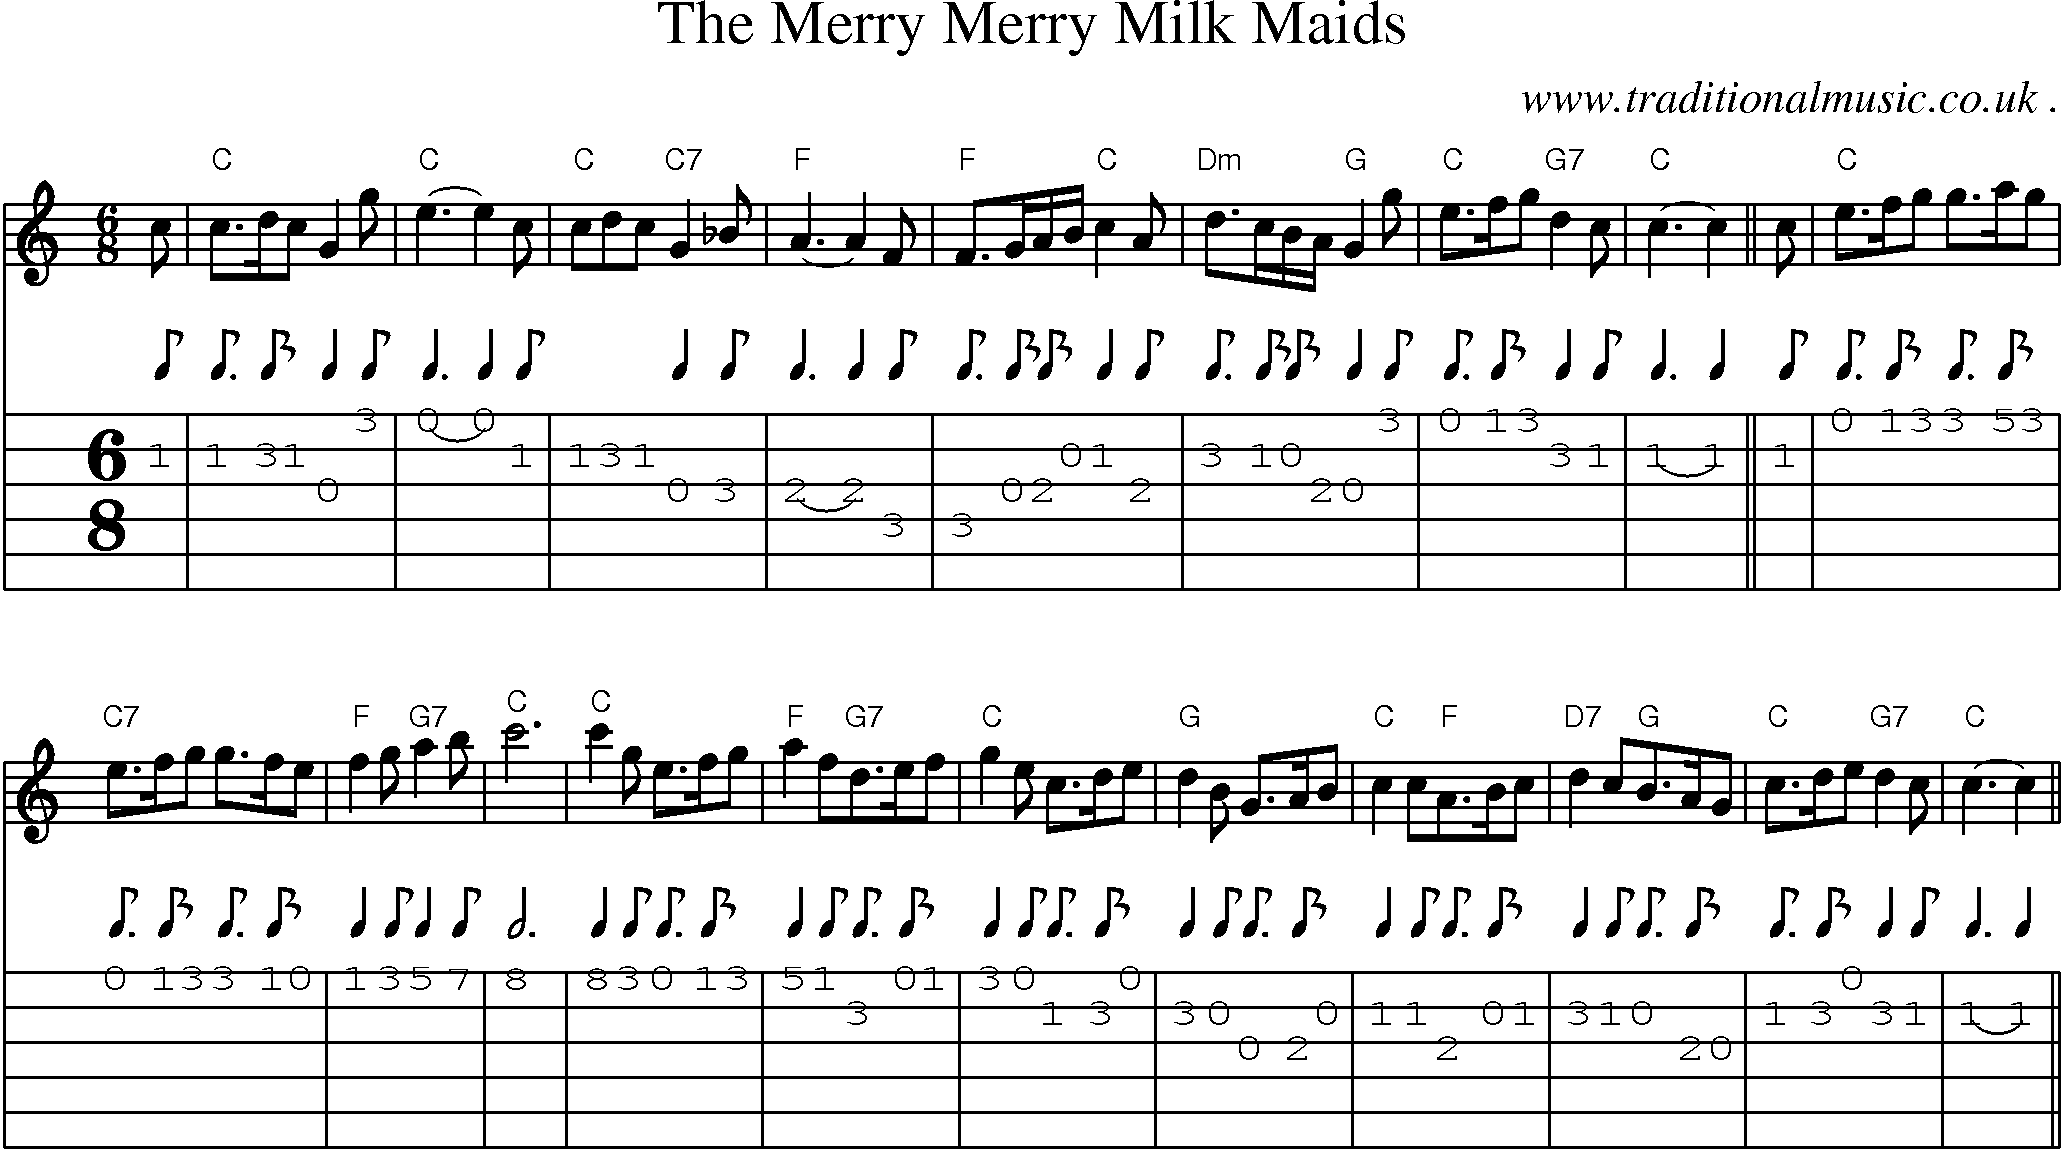 Sheet-Music and Guitar Tabs for The Merry Merry Milk Maids